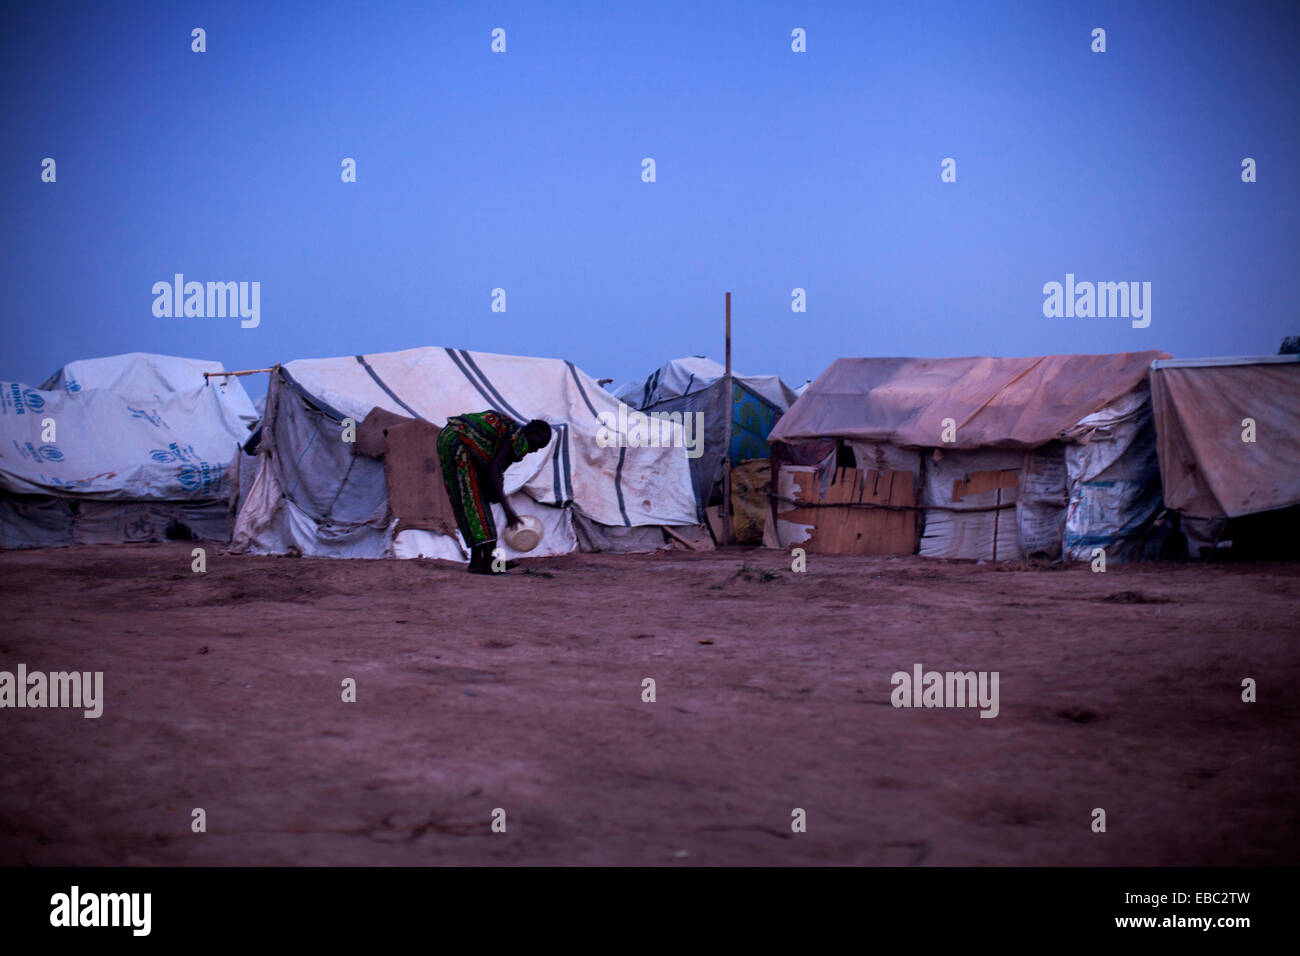 Camp for internally displaced persons, Bangui Central African Republic Stock Photo